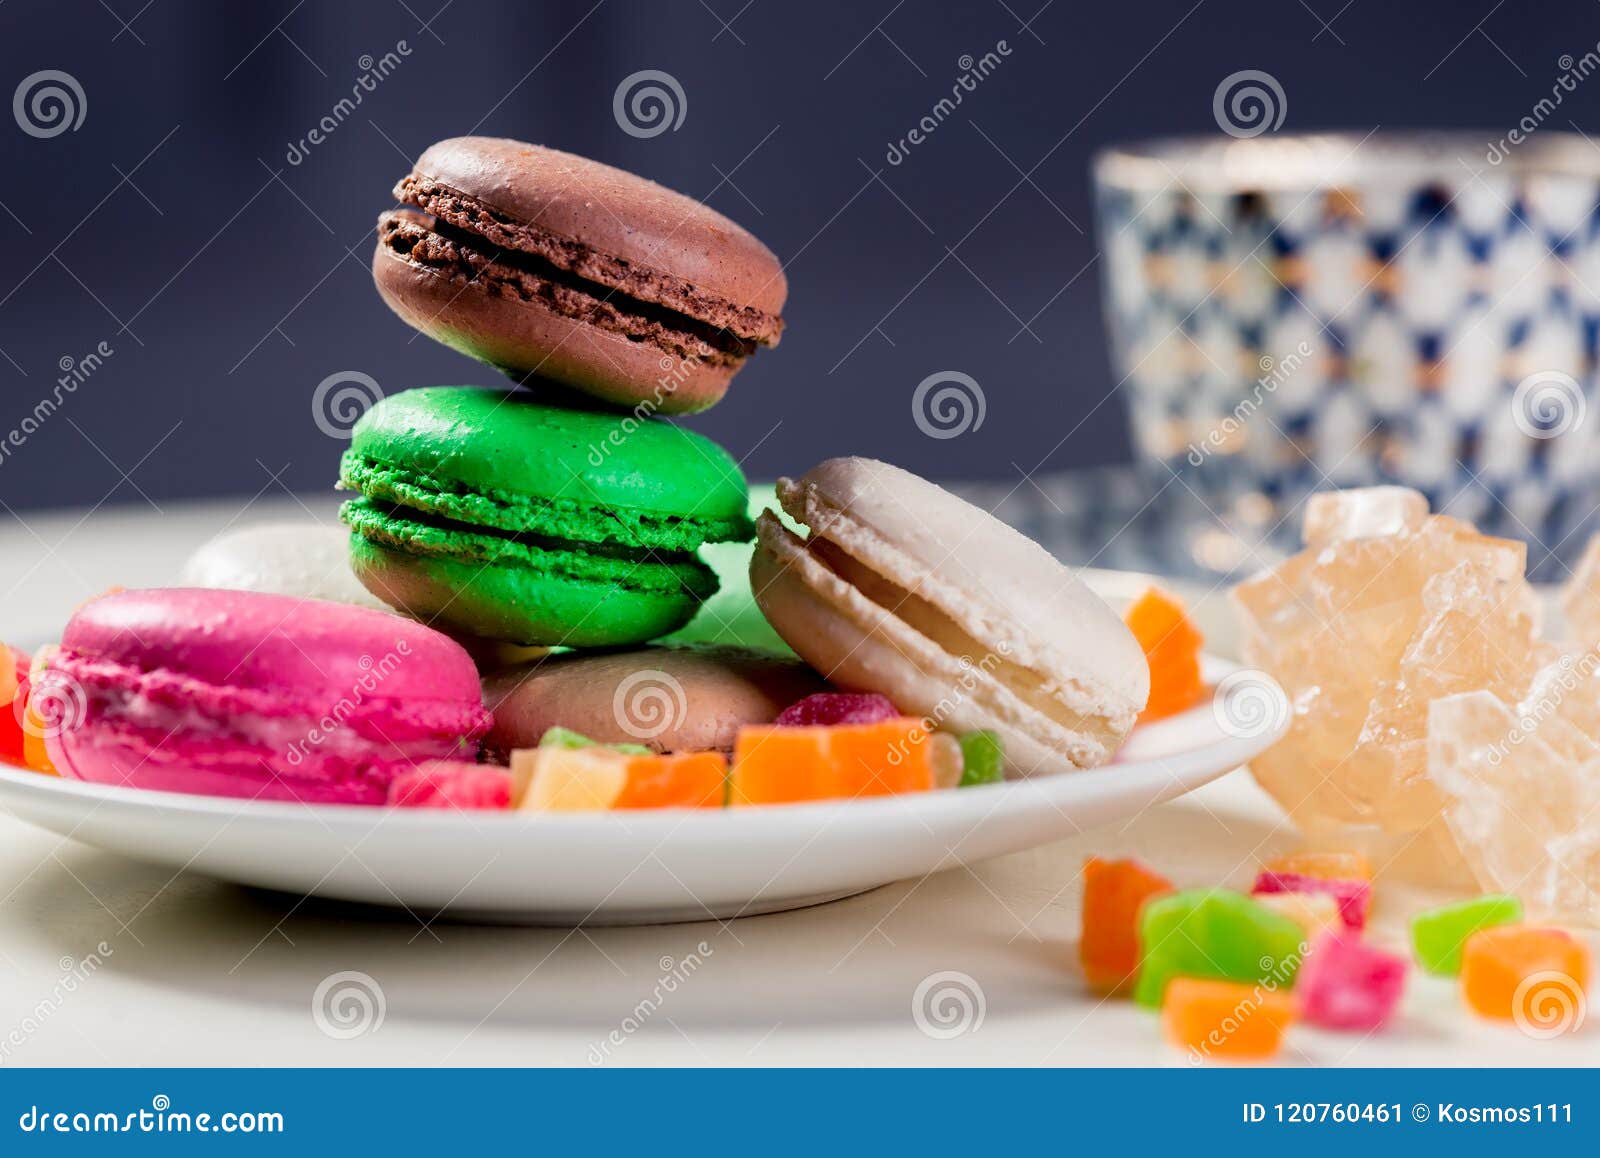 Colored Macaroni Tasty Biscuits Stock Image - Image of green, delicious ...